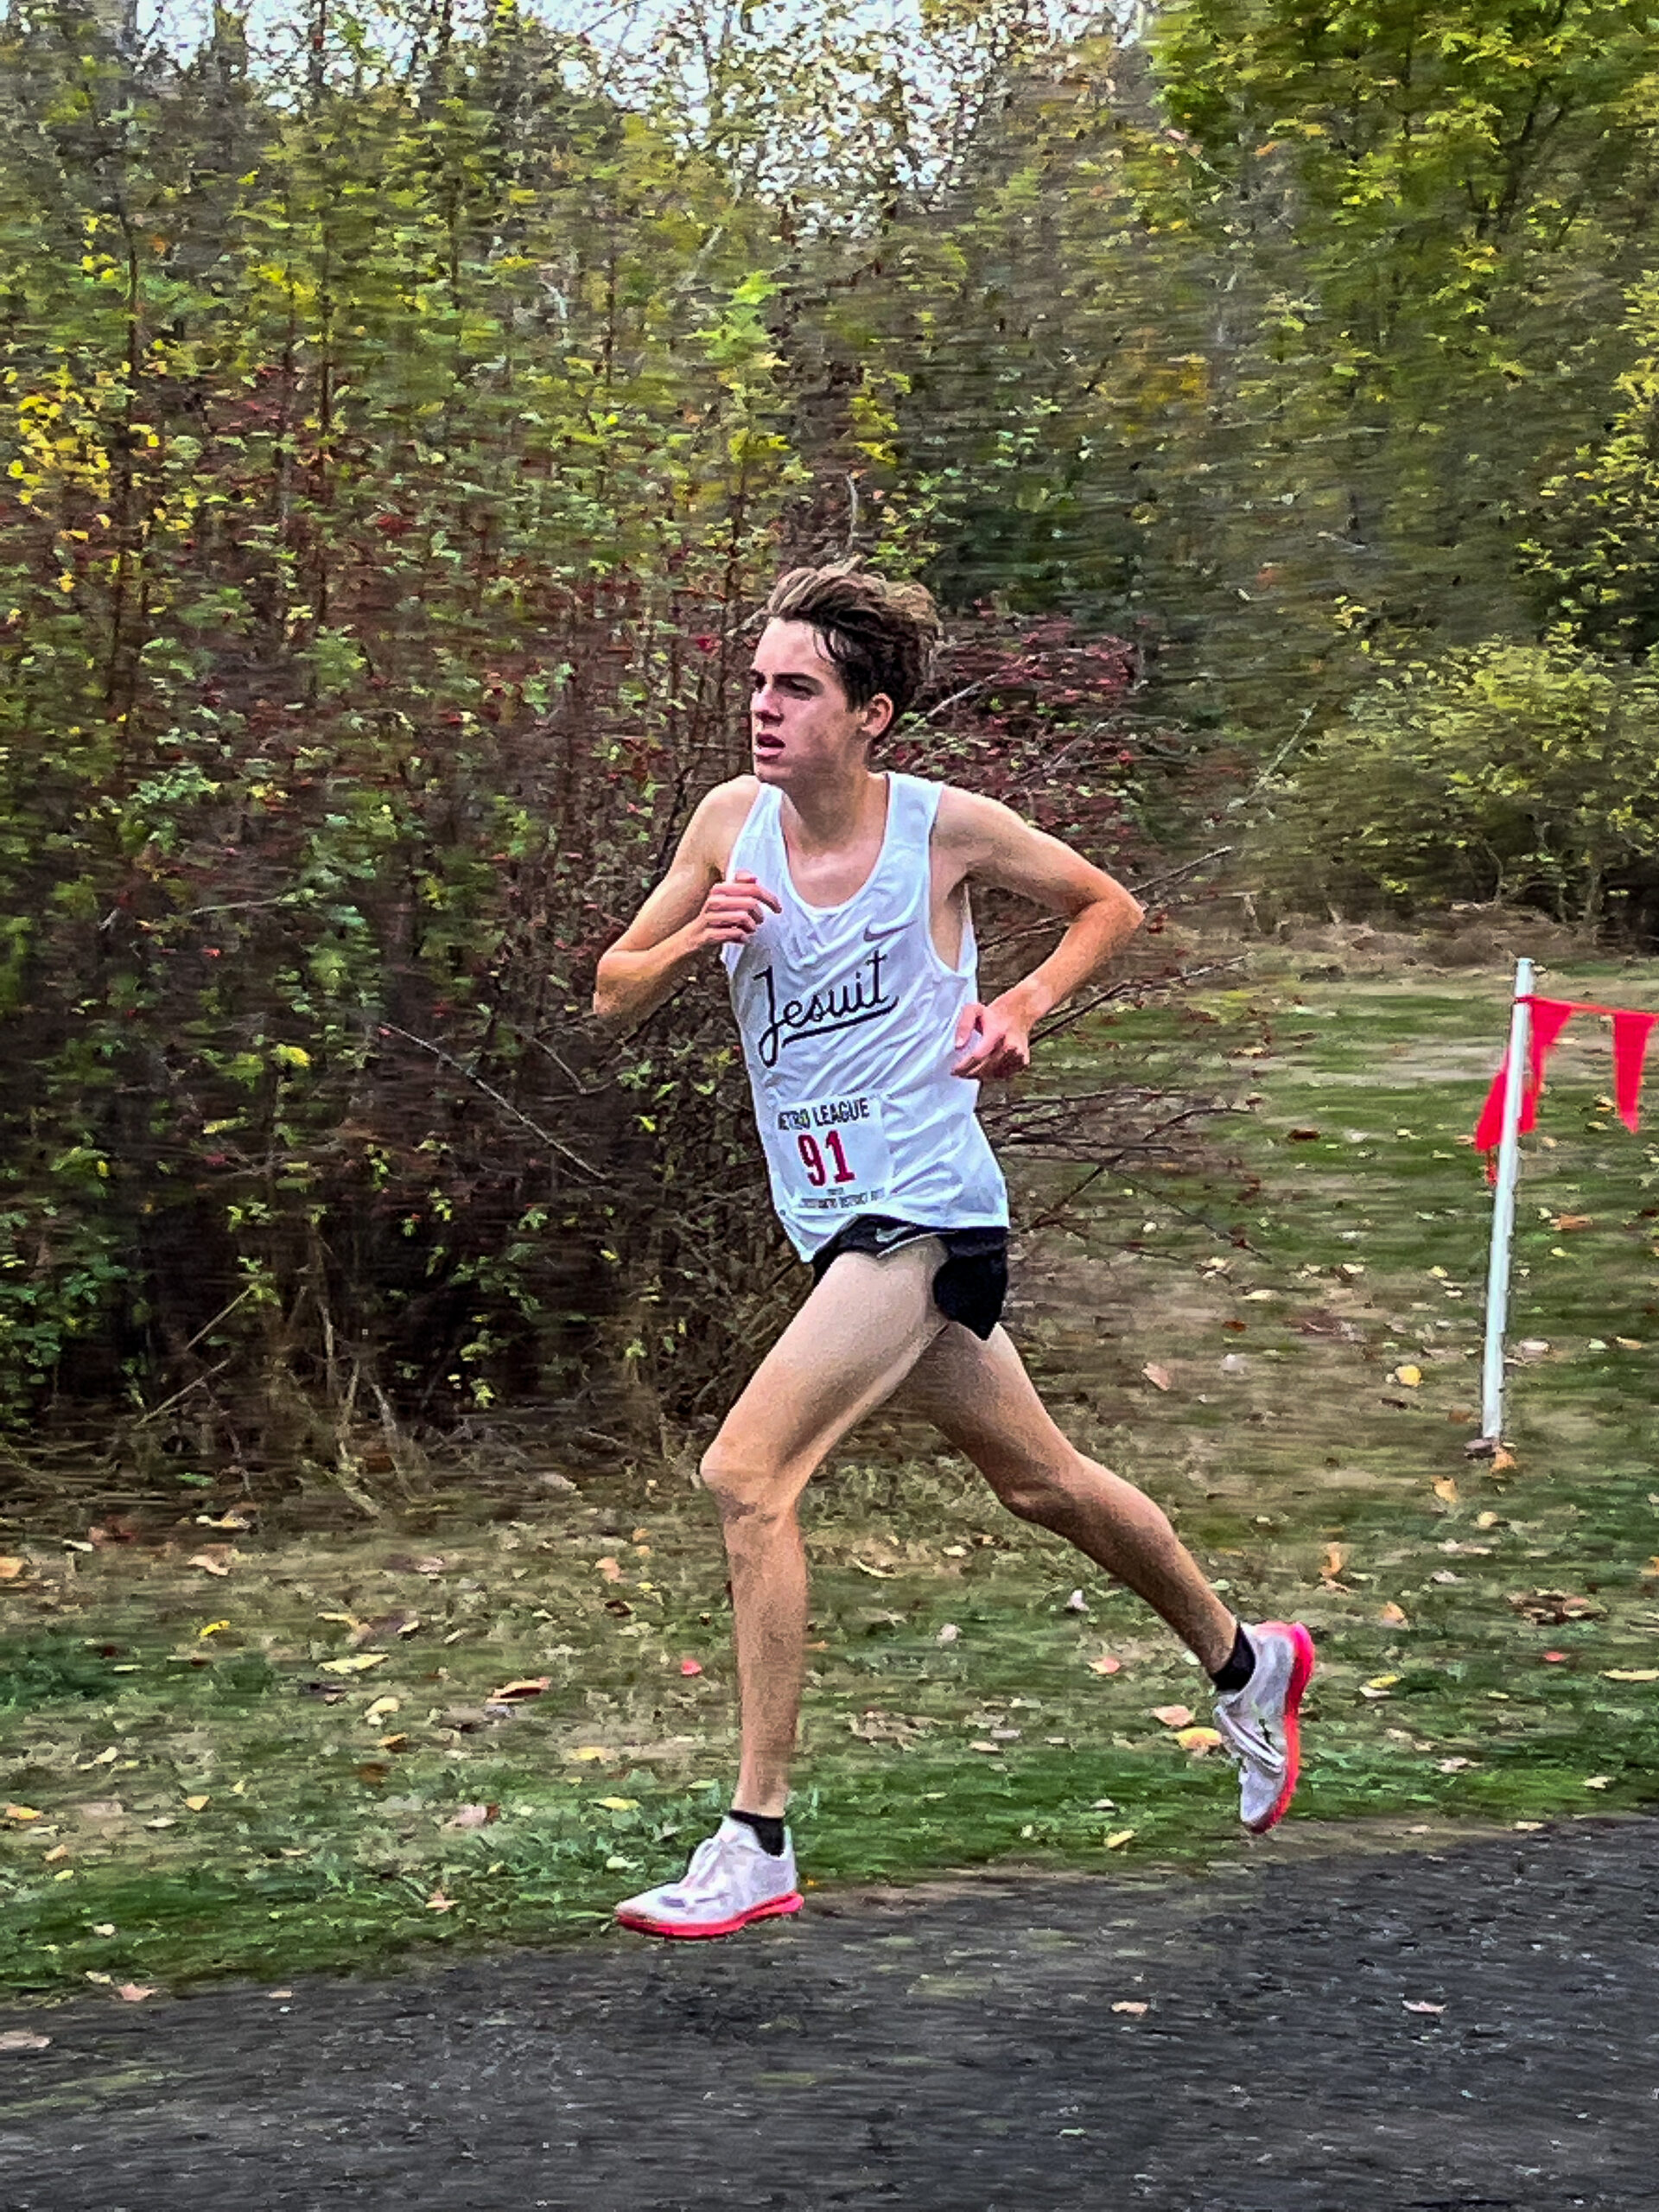 In the fall, Jacob Nenow competes for the Cross Country team.